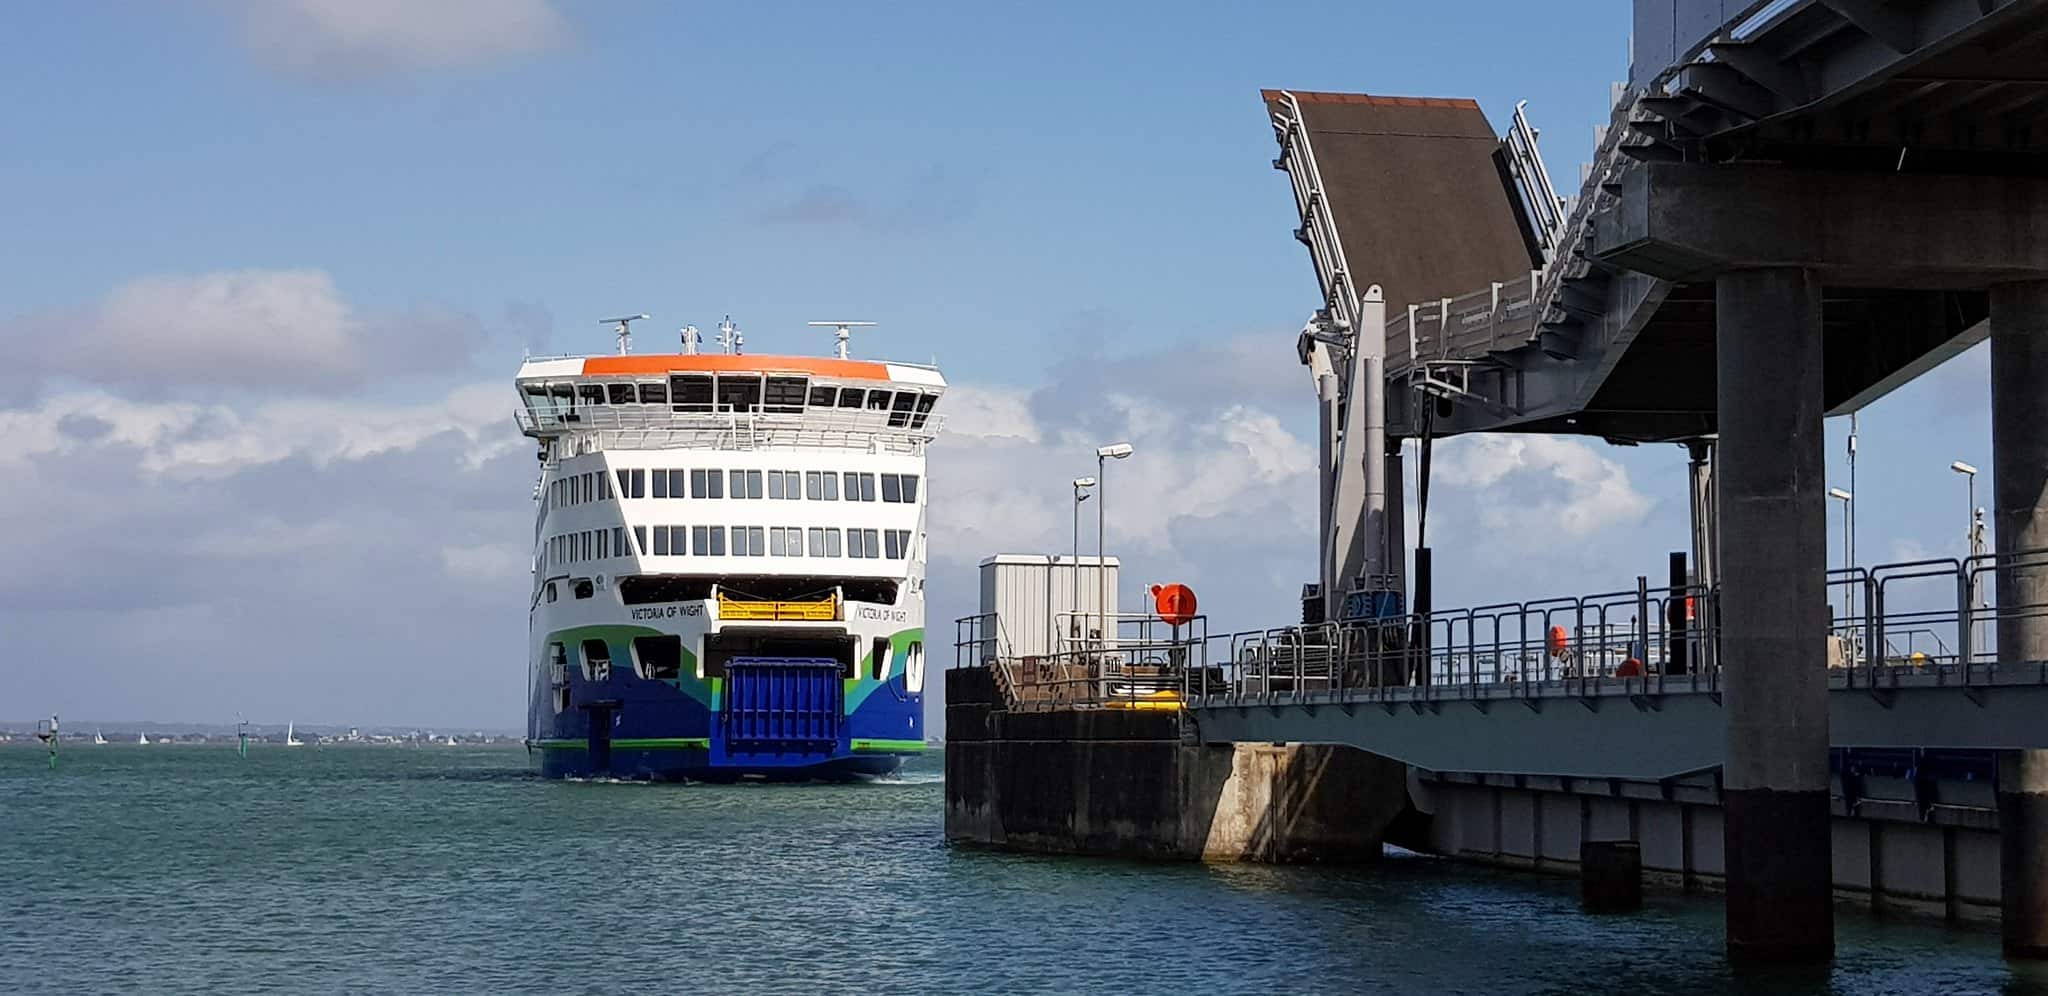 Victoria of Wight ferry docking